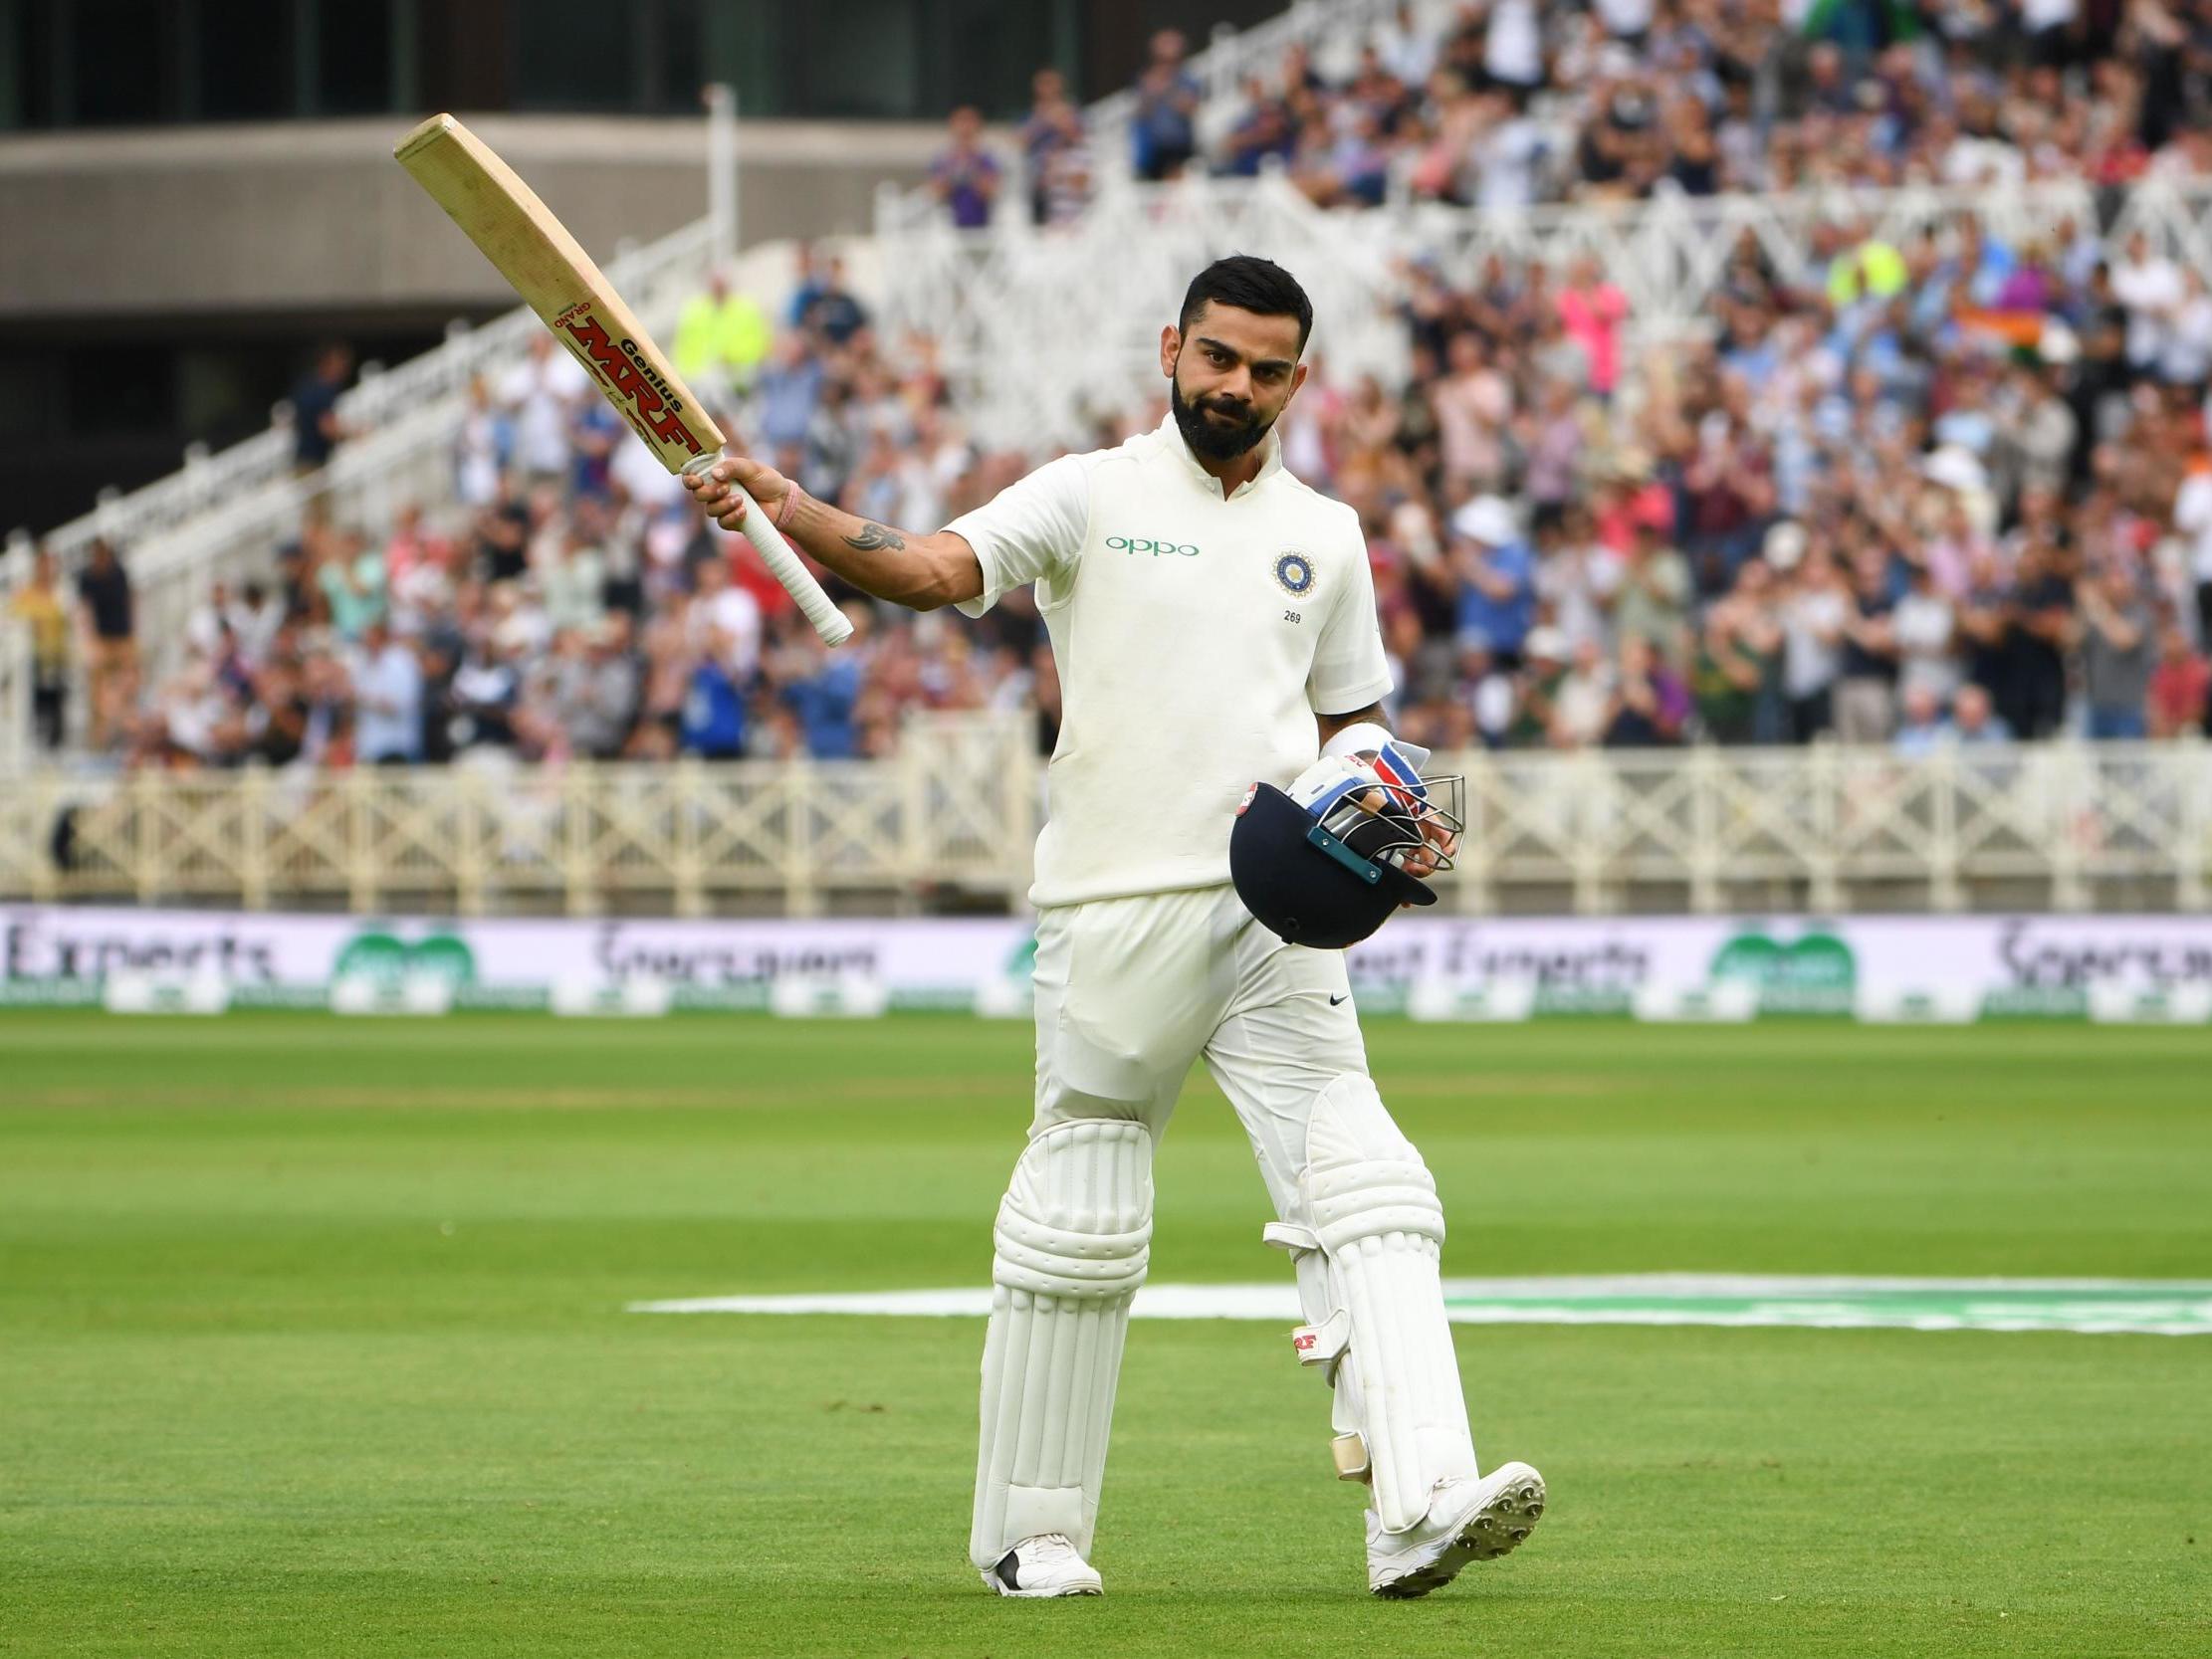 Kohli was India's standout player once more